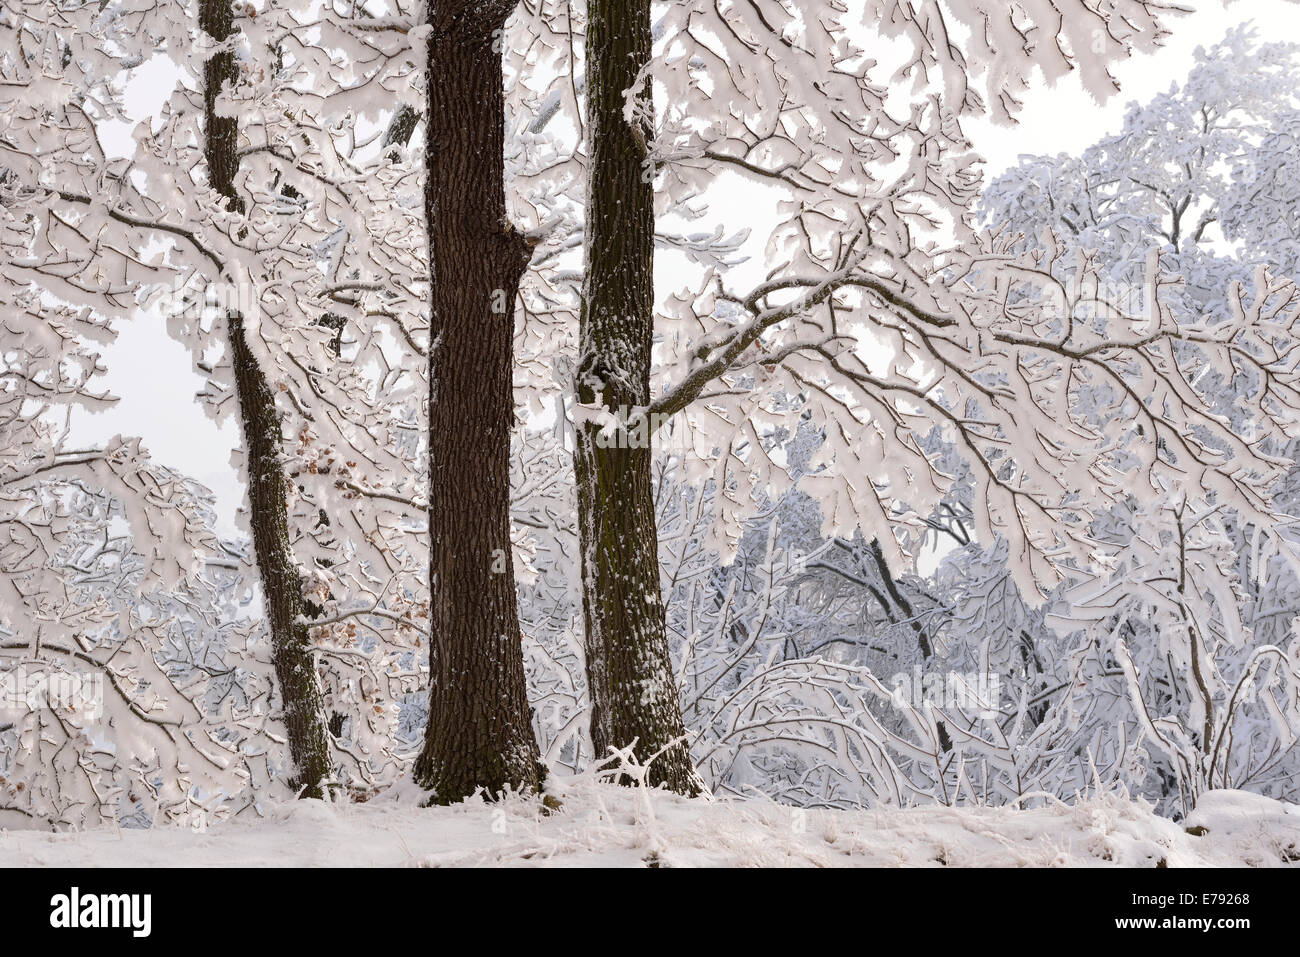 A forest in winter, trees covered with snow and hoarfrost, Roßtrappe cliff, Thale, Saxony-Anhalt, Germany Stock Photo